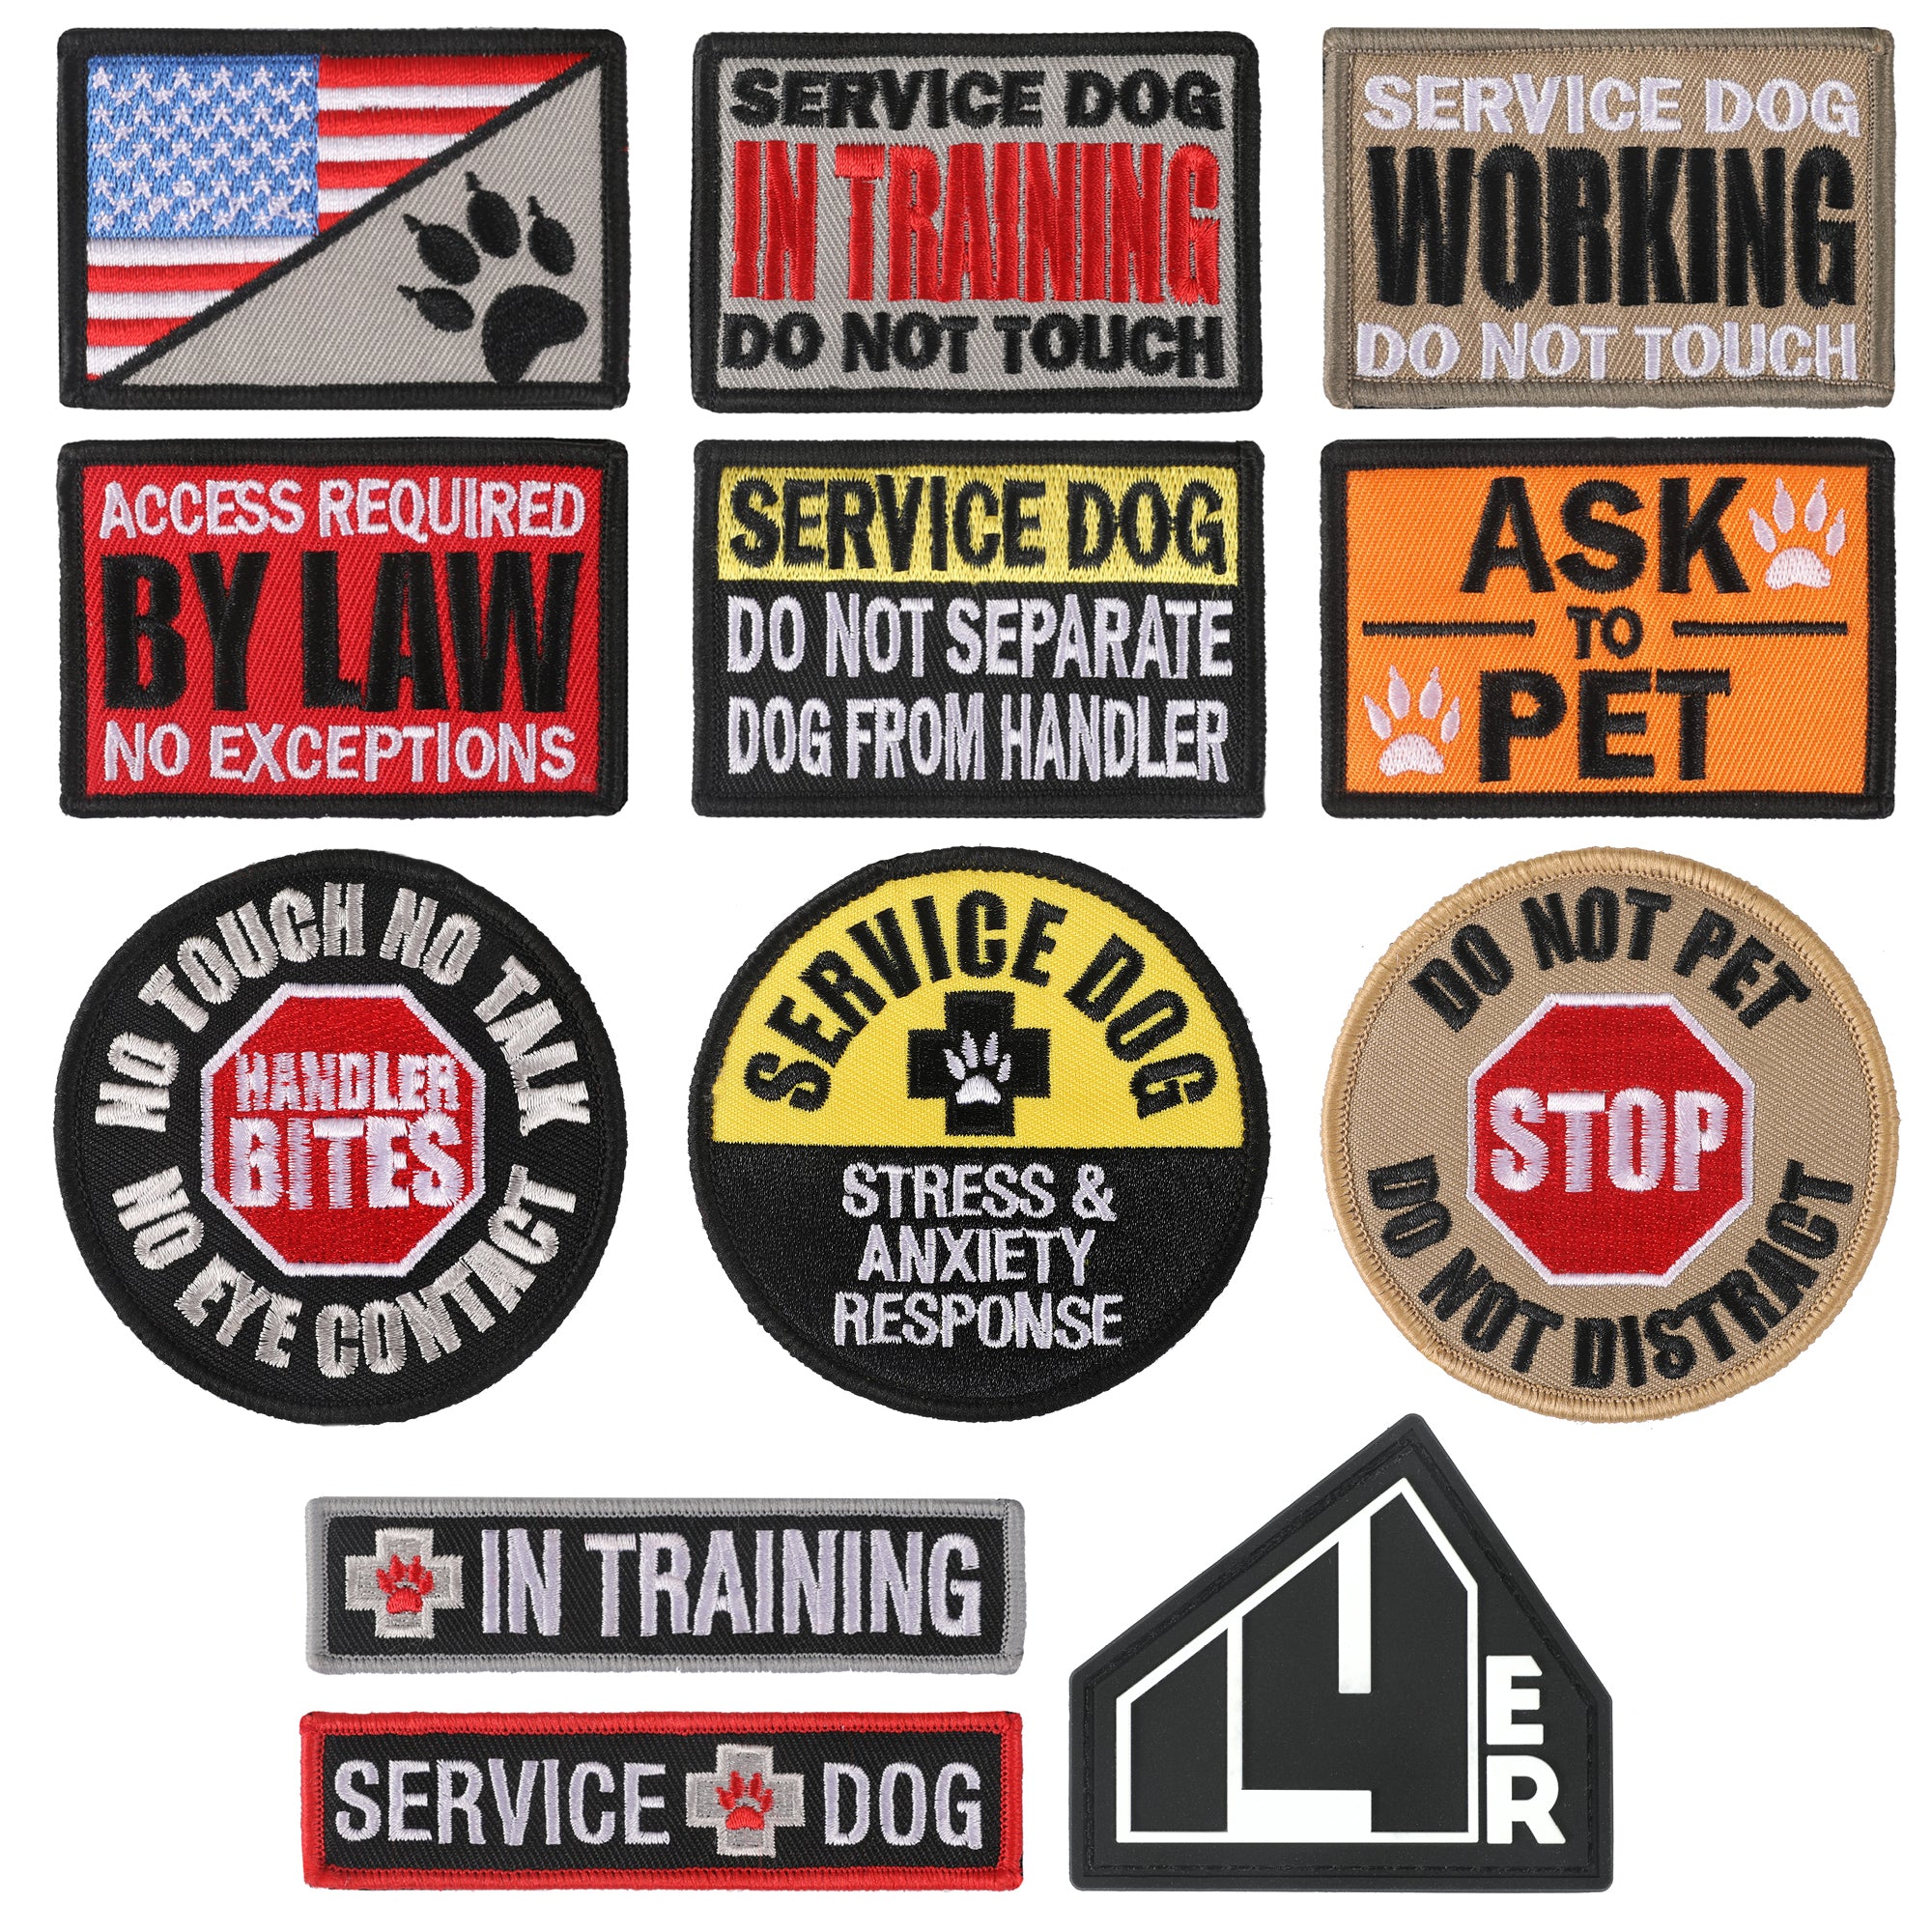 14er Tactical Service Dog Patches, 12-Pack